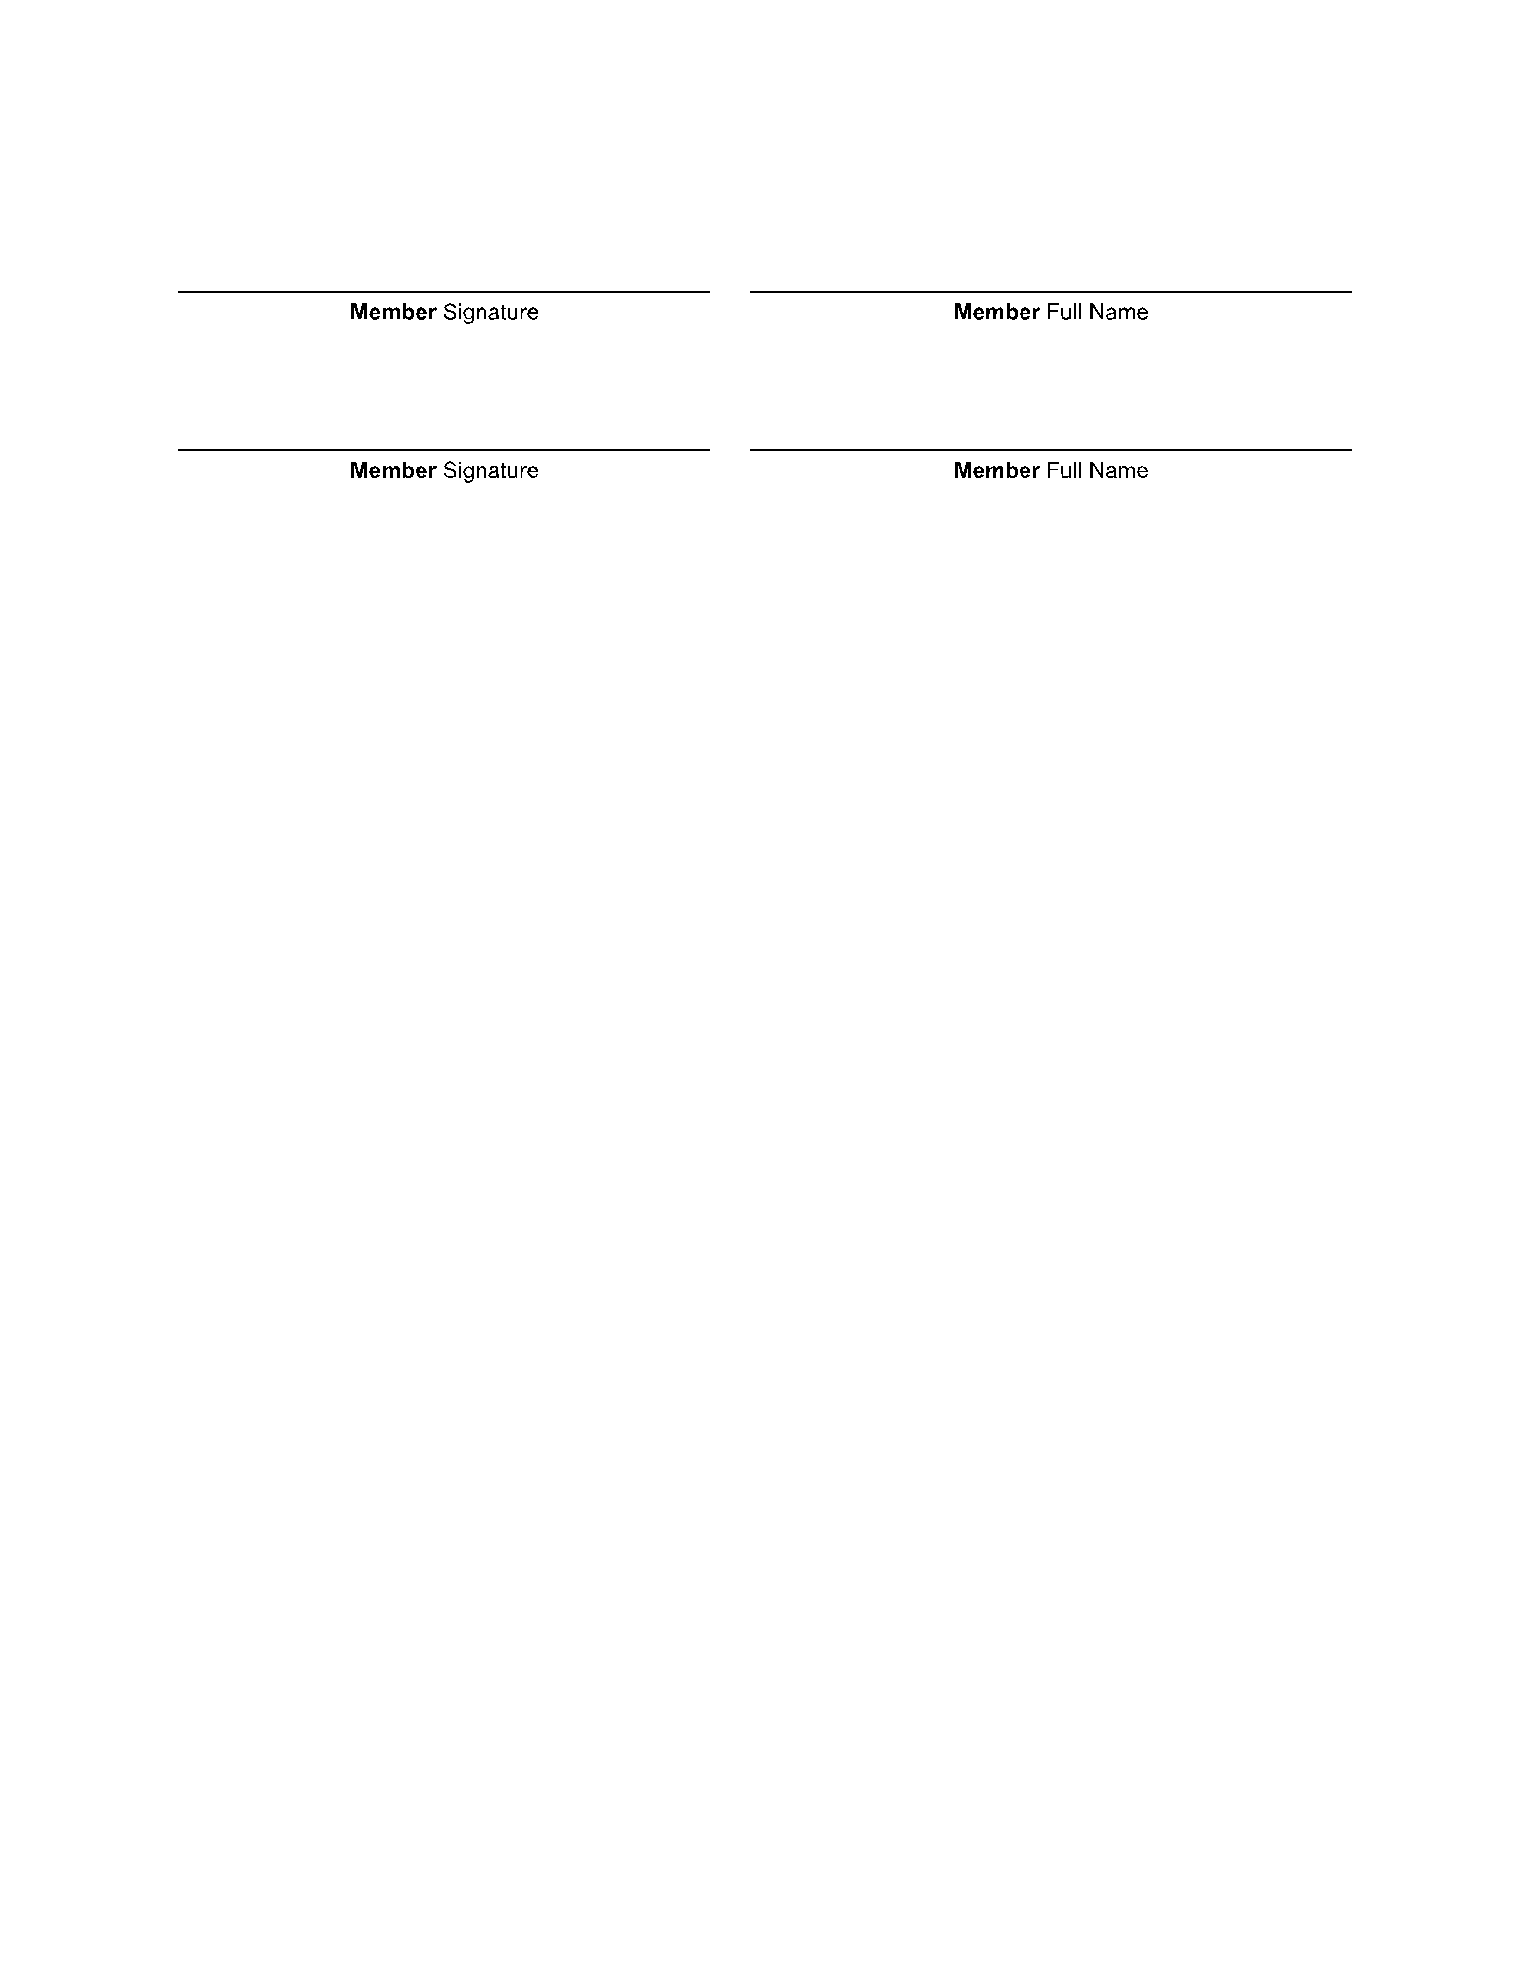 Operating Agreement Template 8